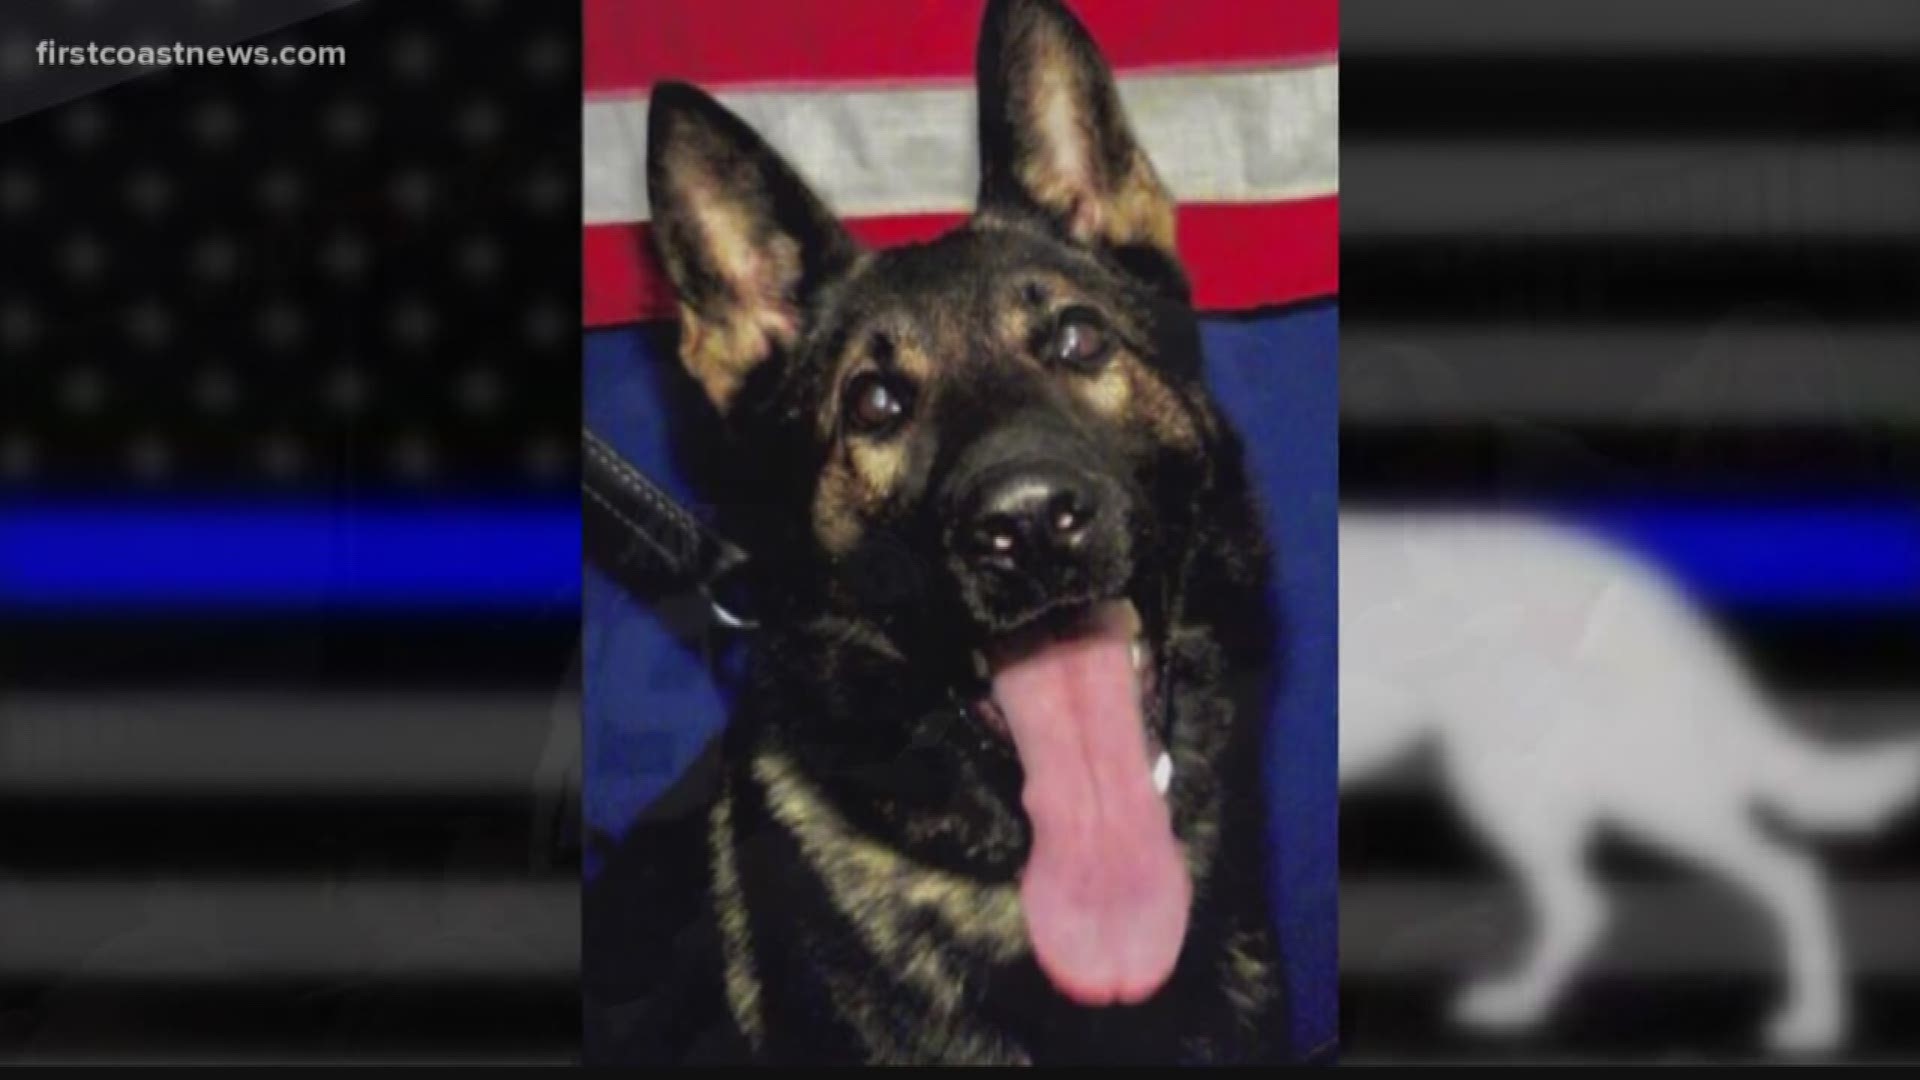 This comes amidst the call for stronger penalties for those who kill police K-9s.